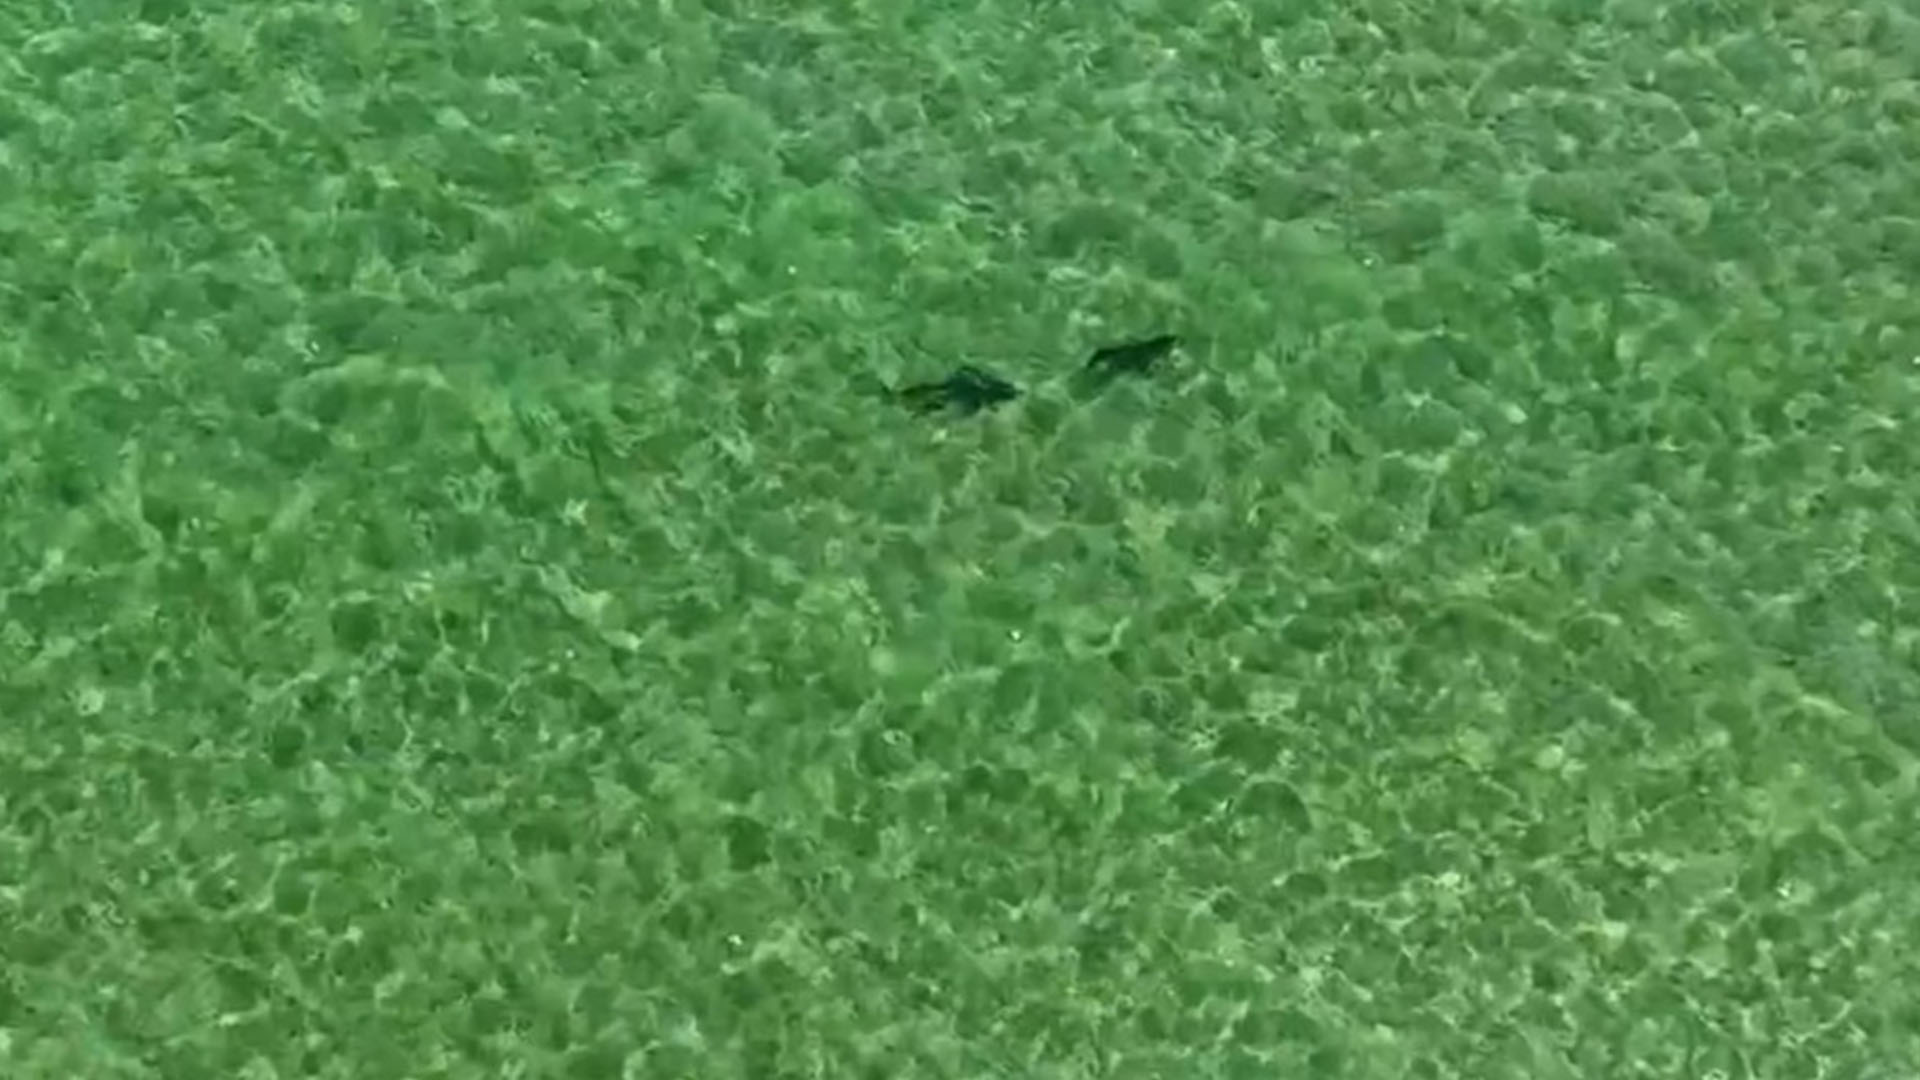 After terrifying drone footage that shows sharks lurking around swimmers, there were multiple sightings of great white sharks close to beaches.